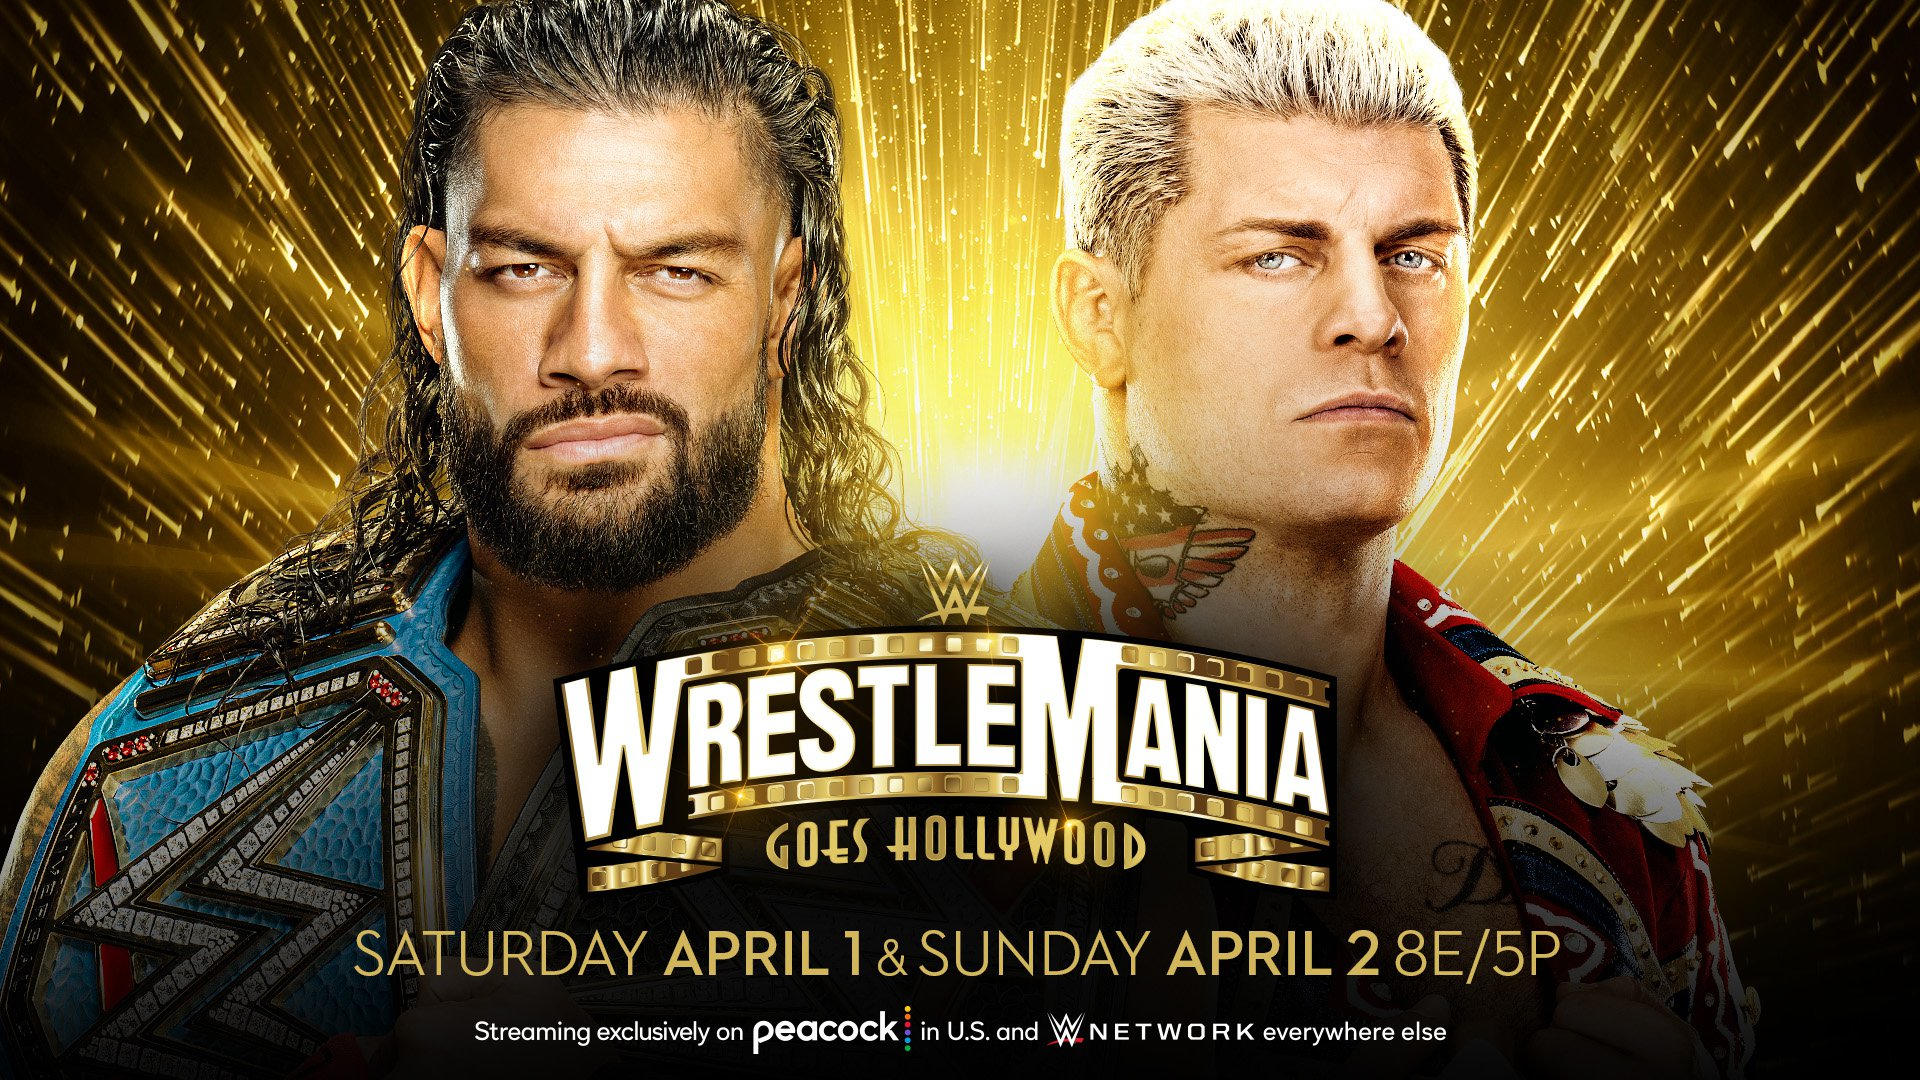 WrestleMania 2023 tickets: Prices, how much do seats cost for WWE event in Hollywood?